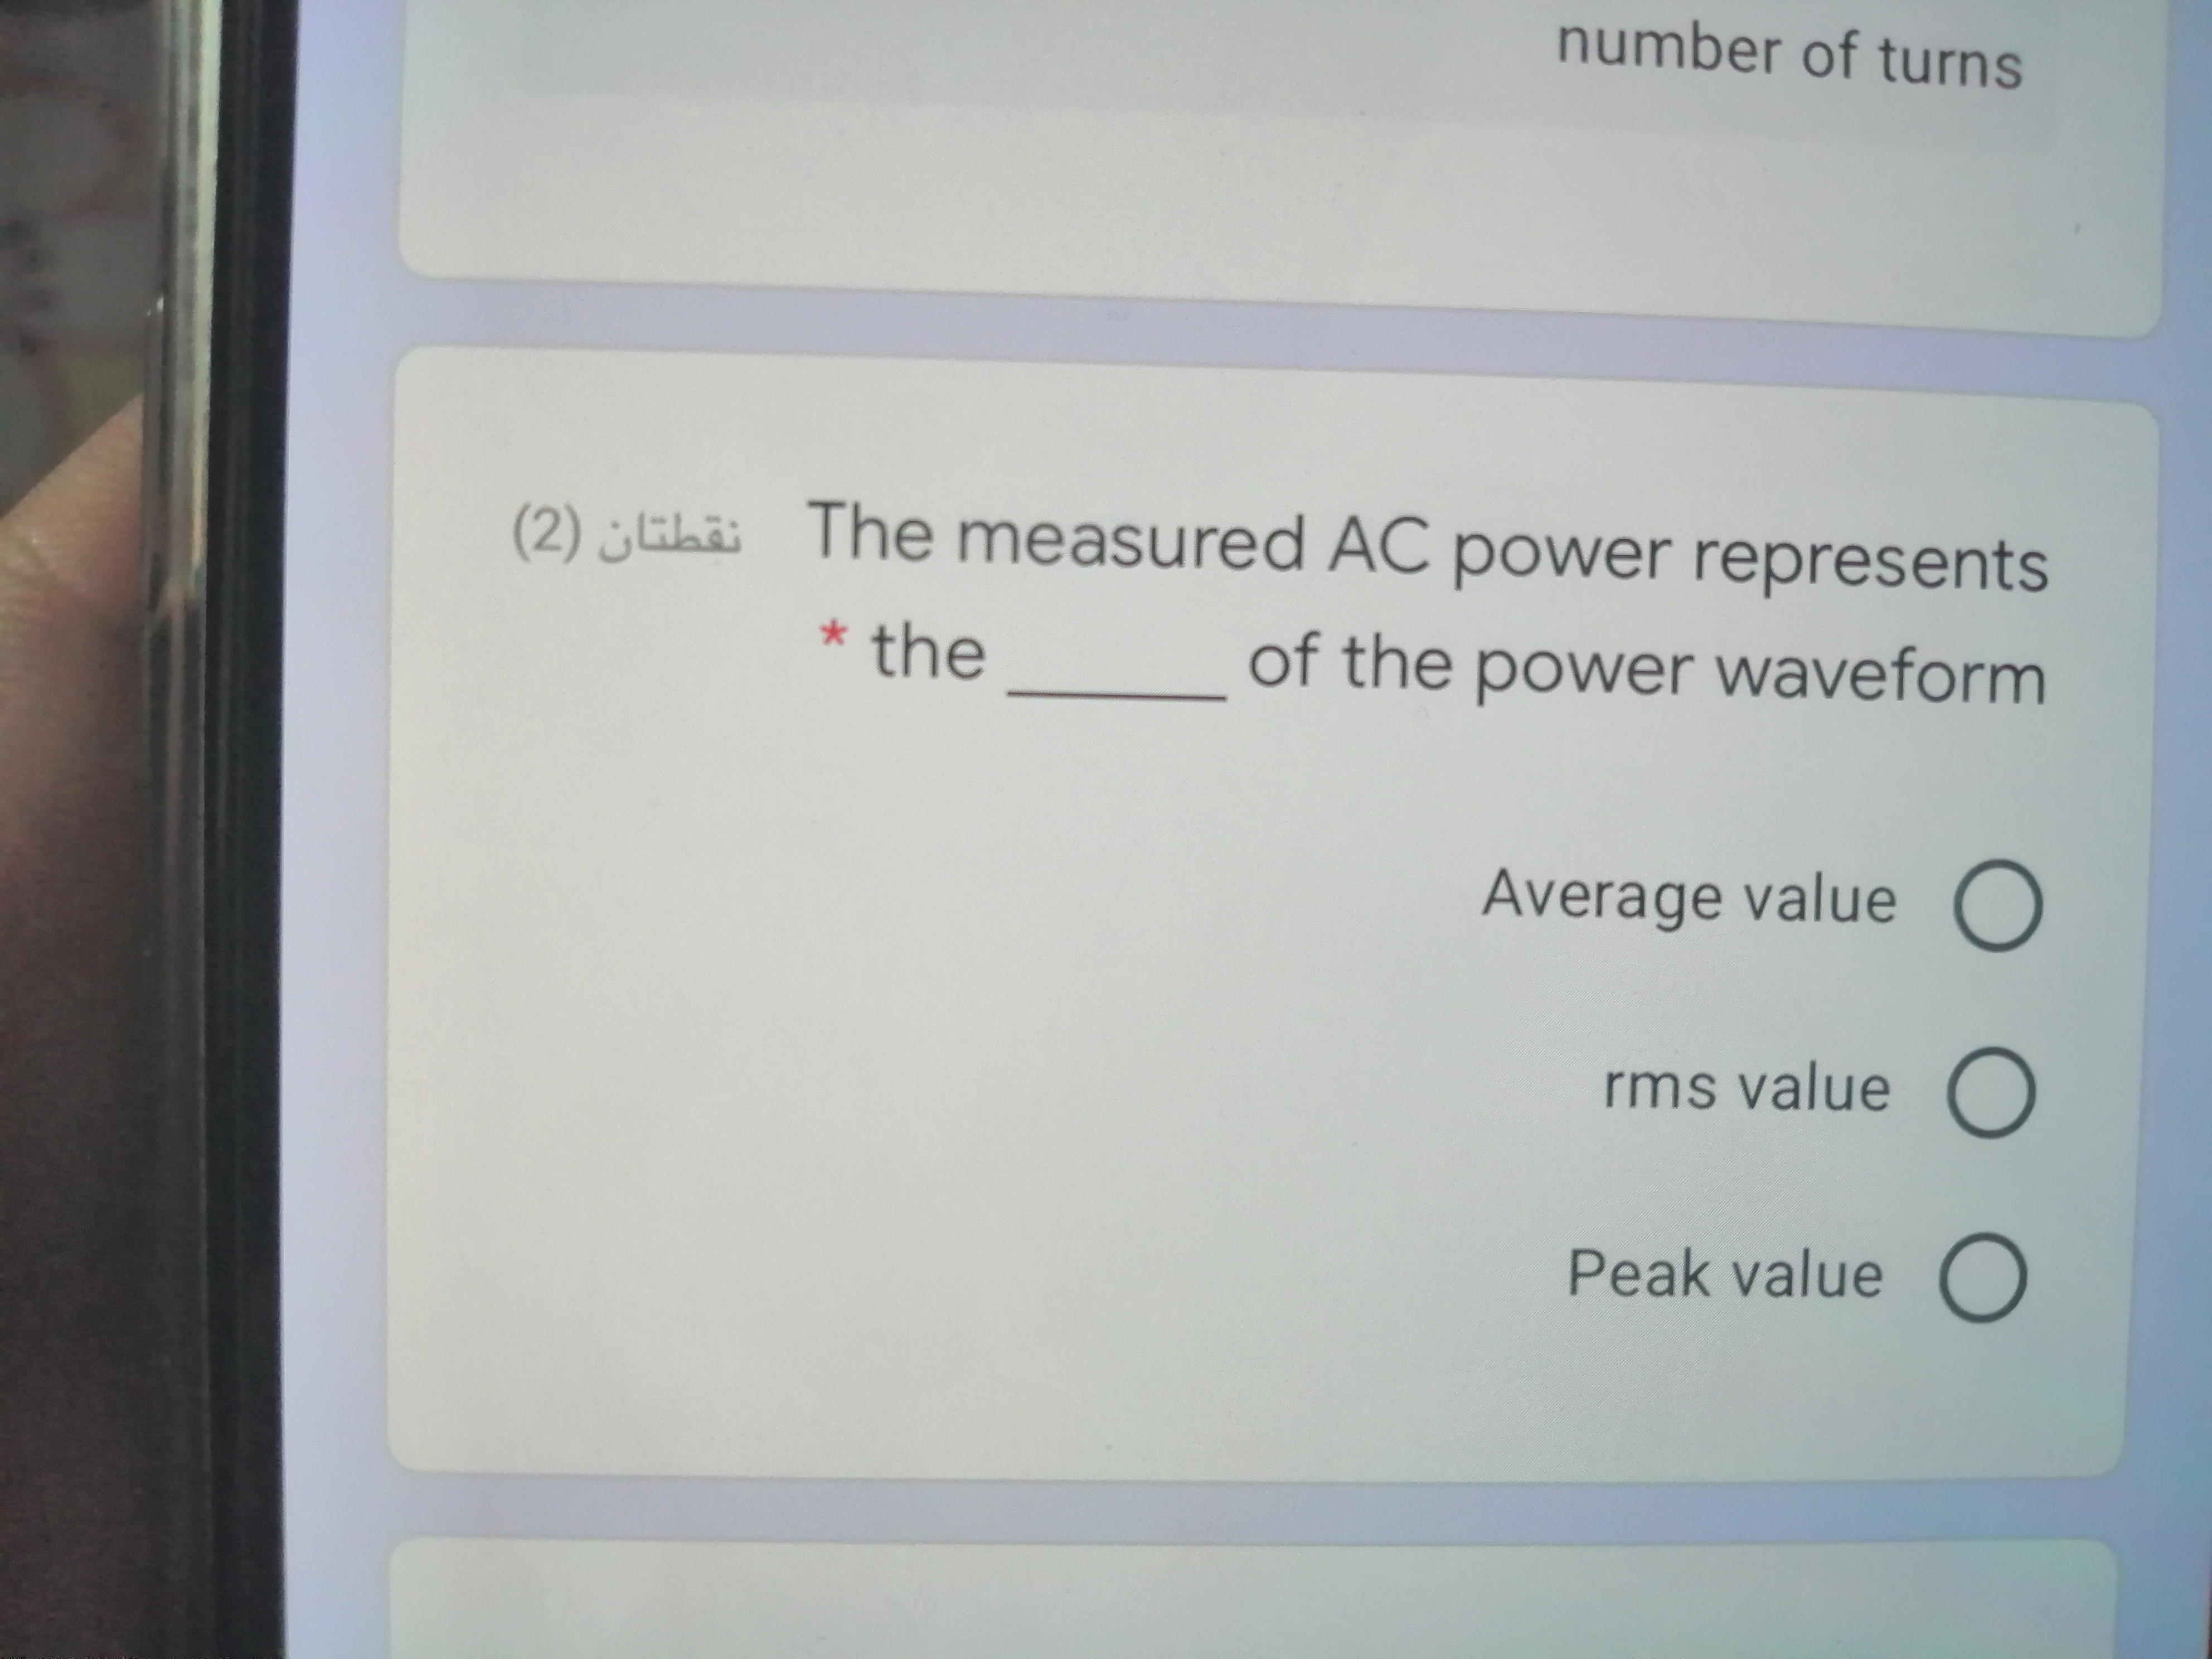 (2) „ELäi The measured AC power represents
* the
of the power waveform
Average value O
rms value O
Peak value O
